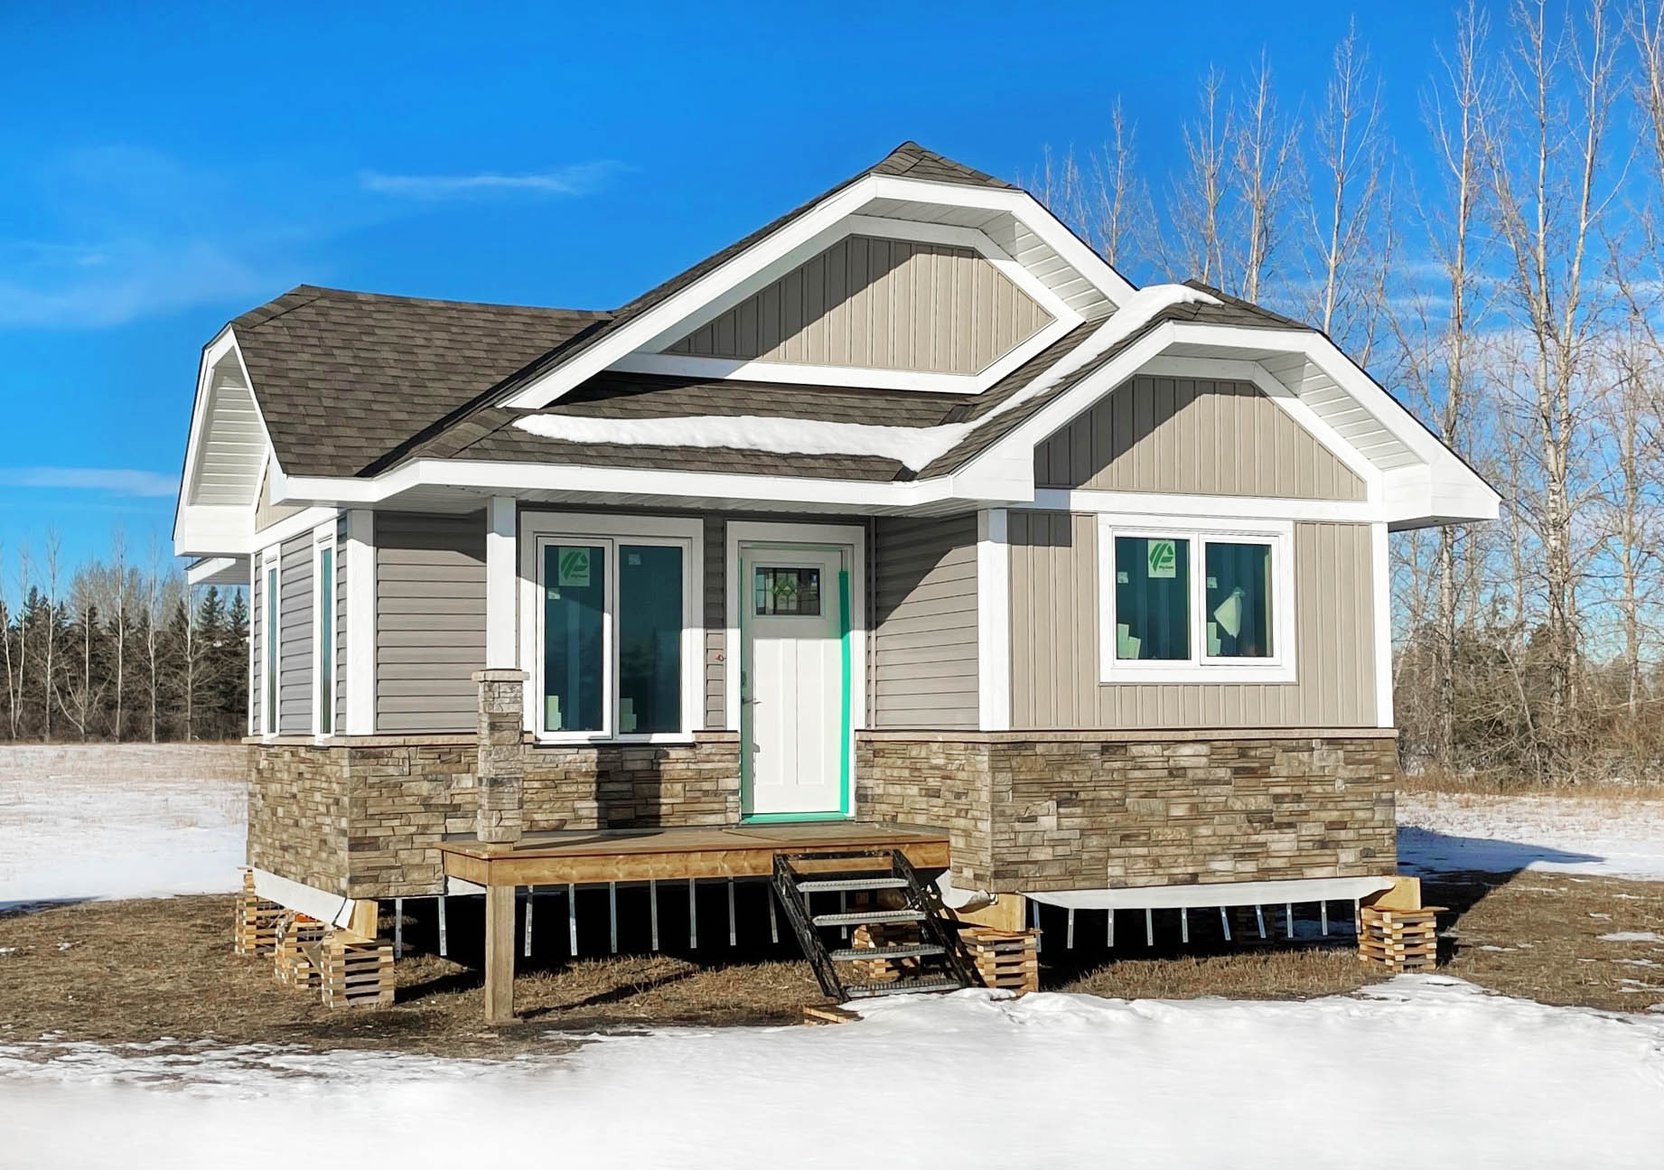 aries house plan nelson homes modular ready to move homes.jpg